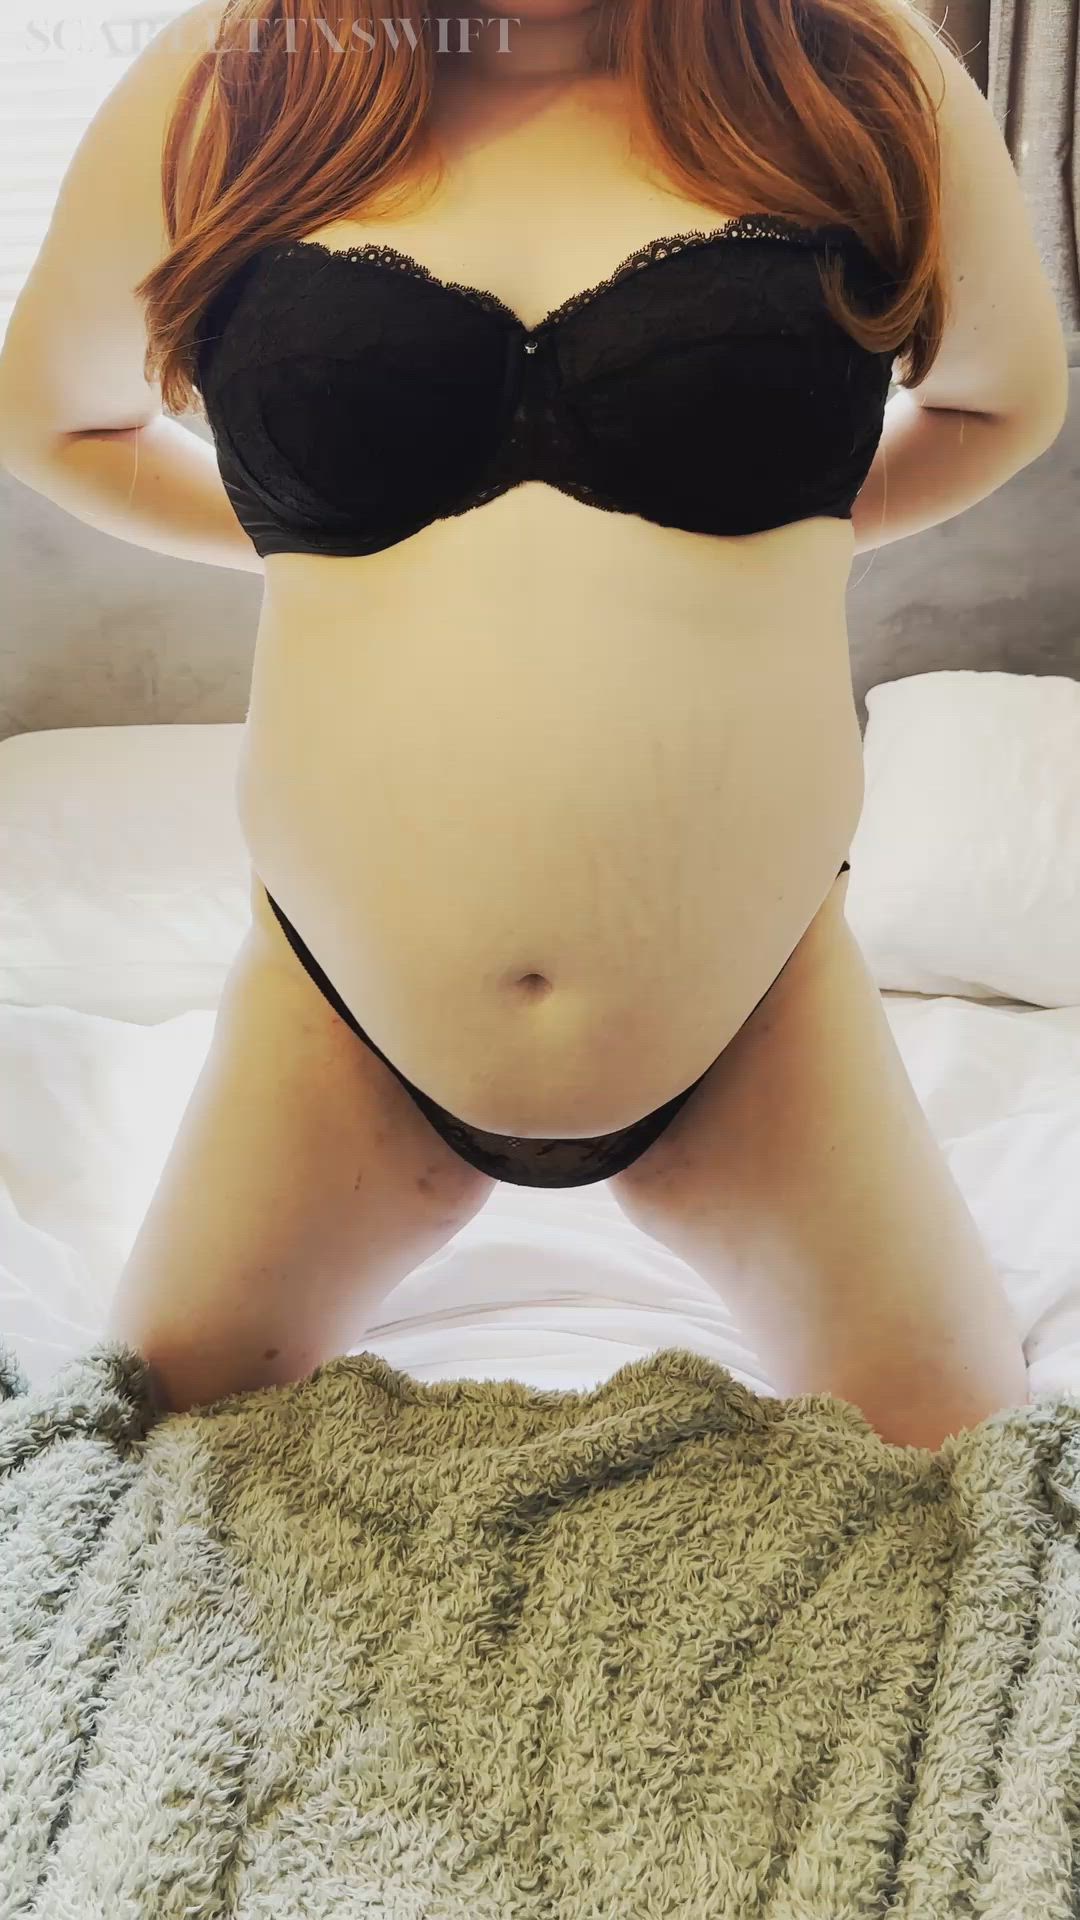 Pregnant porn video with onlyfans model scarlettswift <strong>@scarlettxswift</strong>